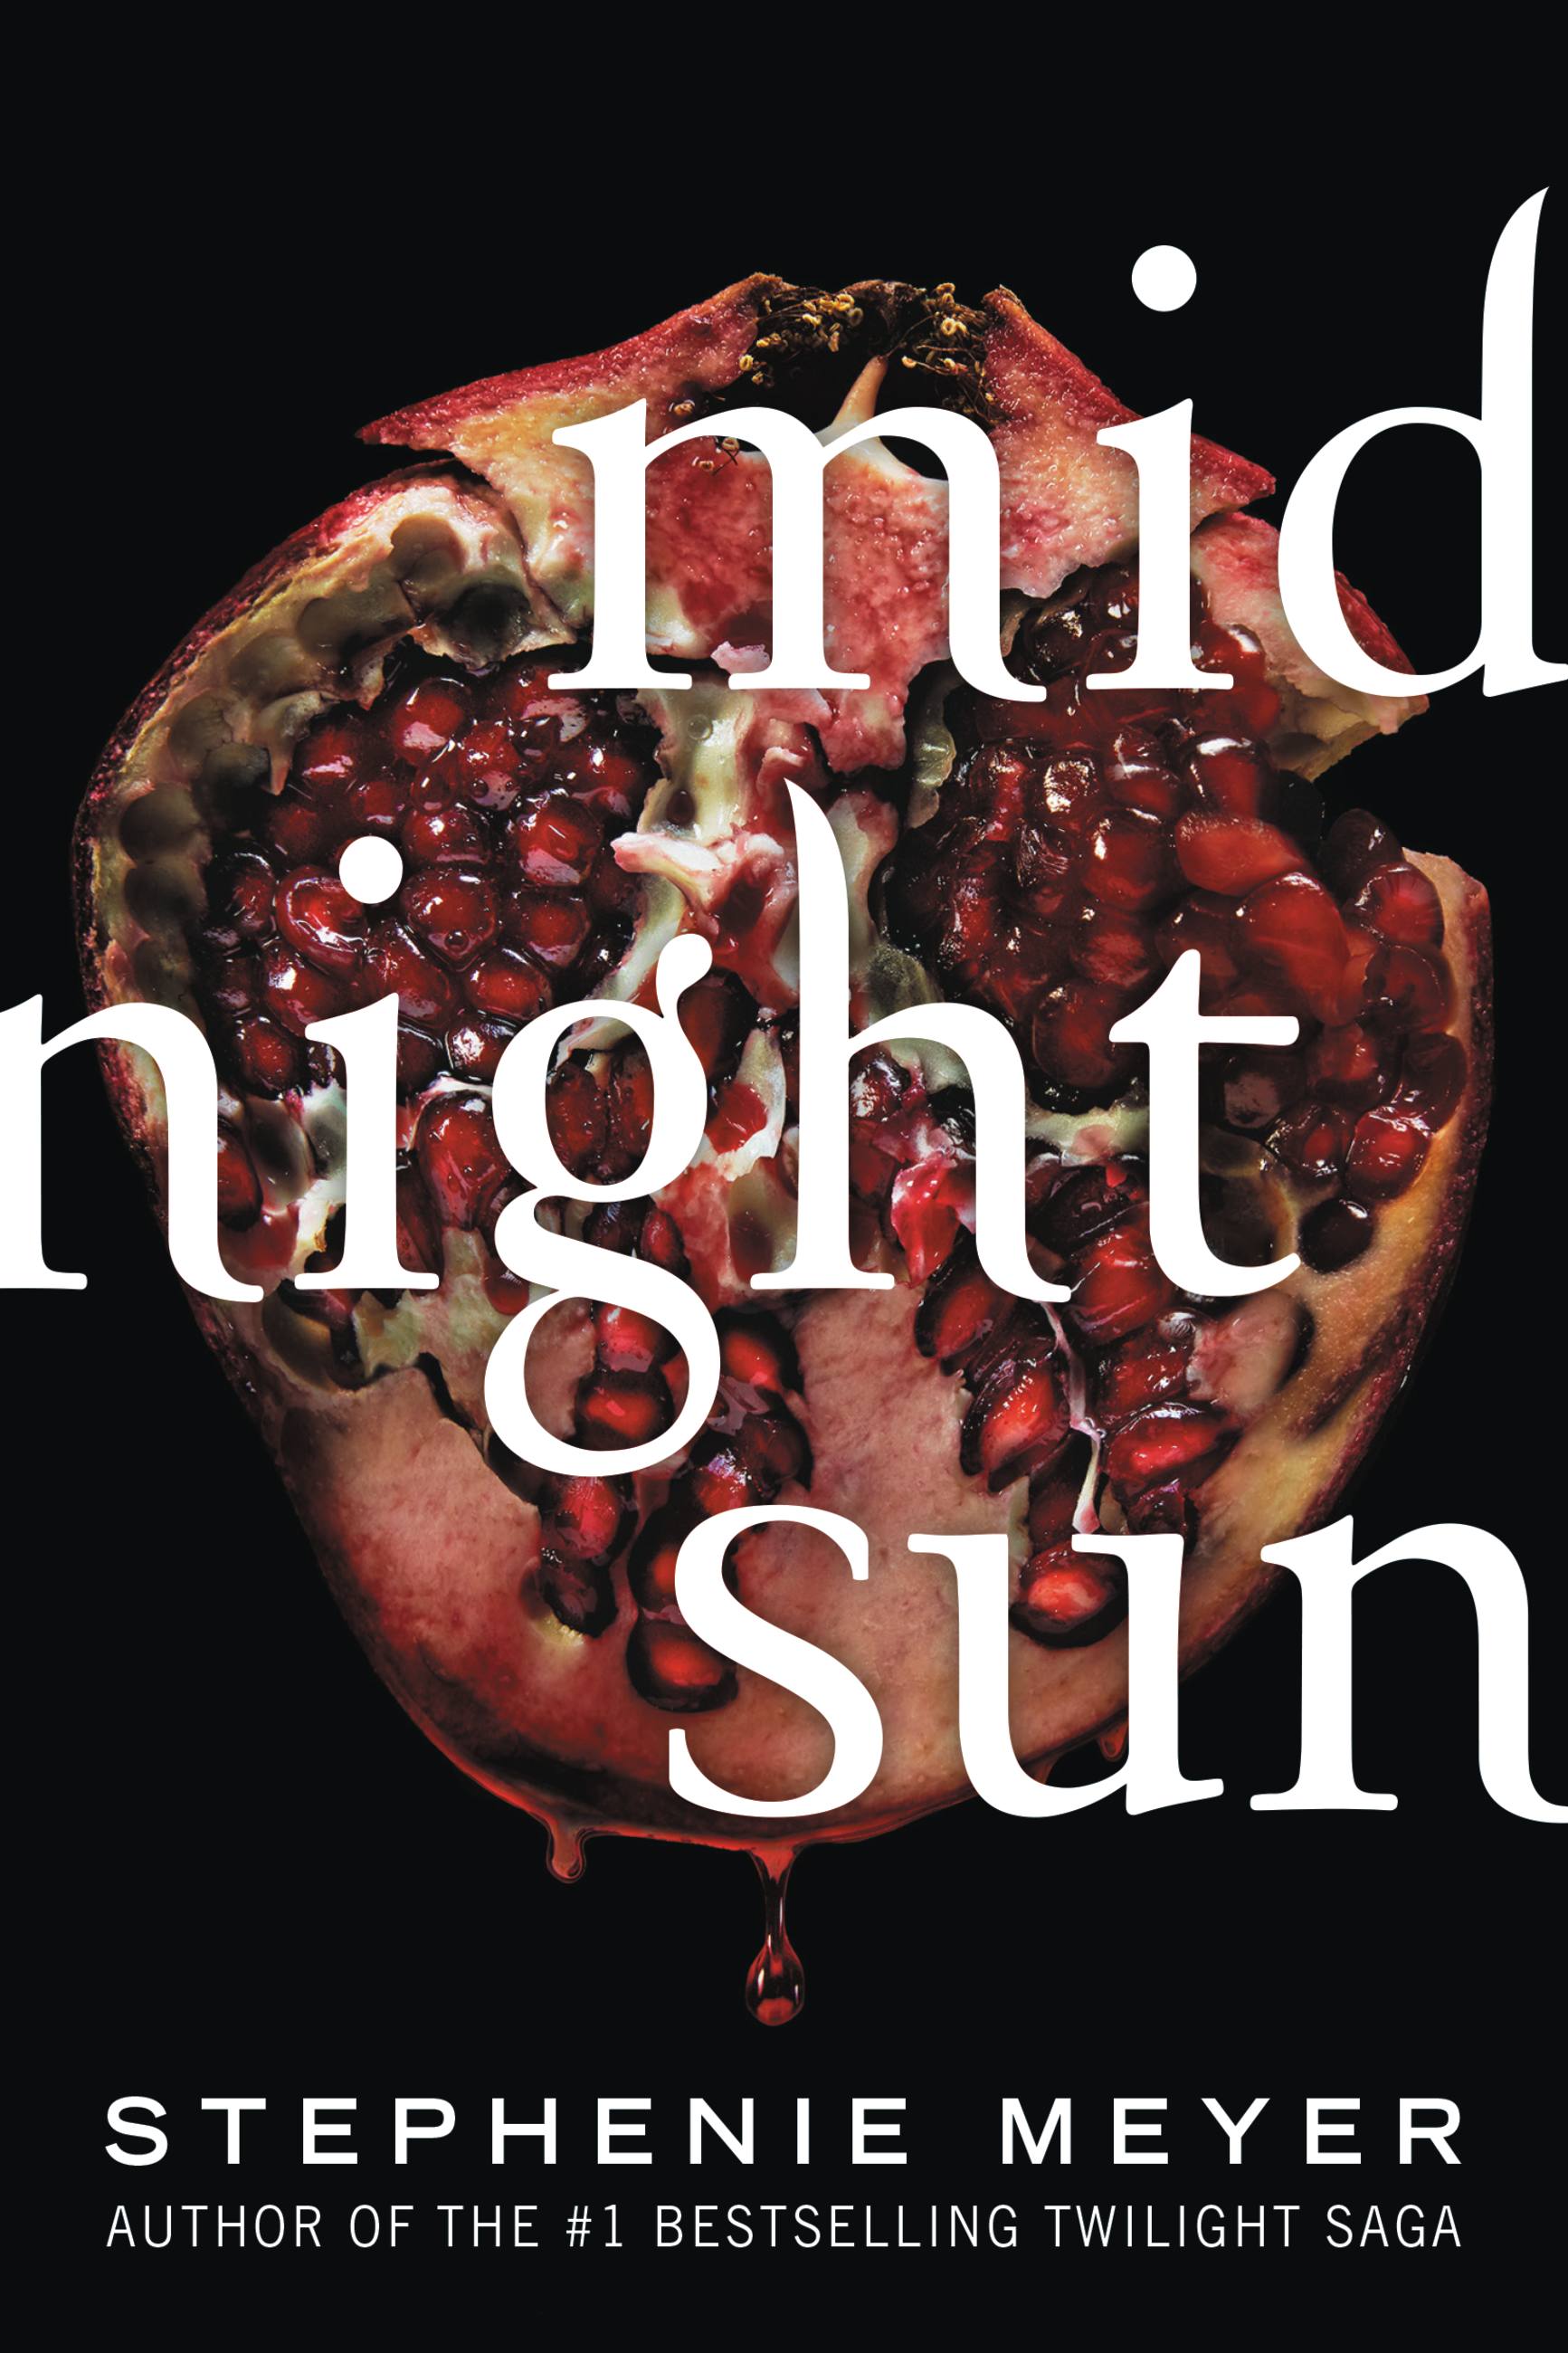 Thoughts: Midnight Suns